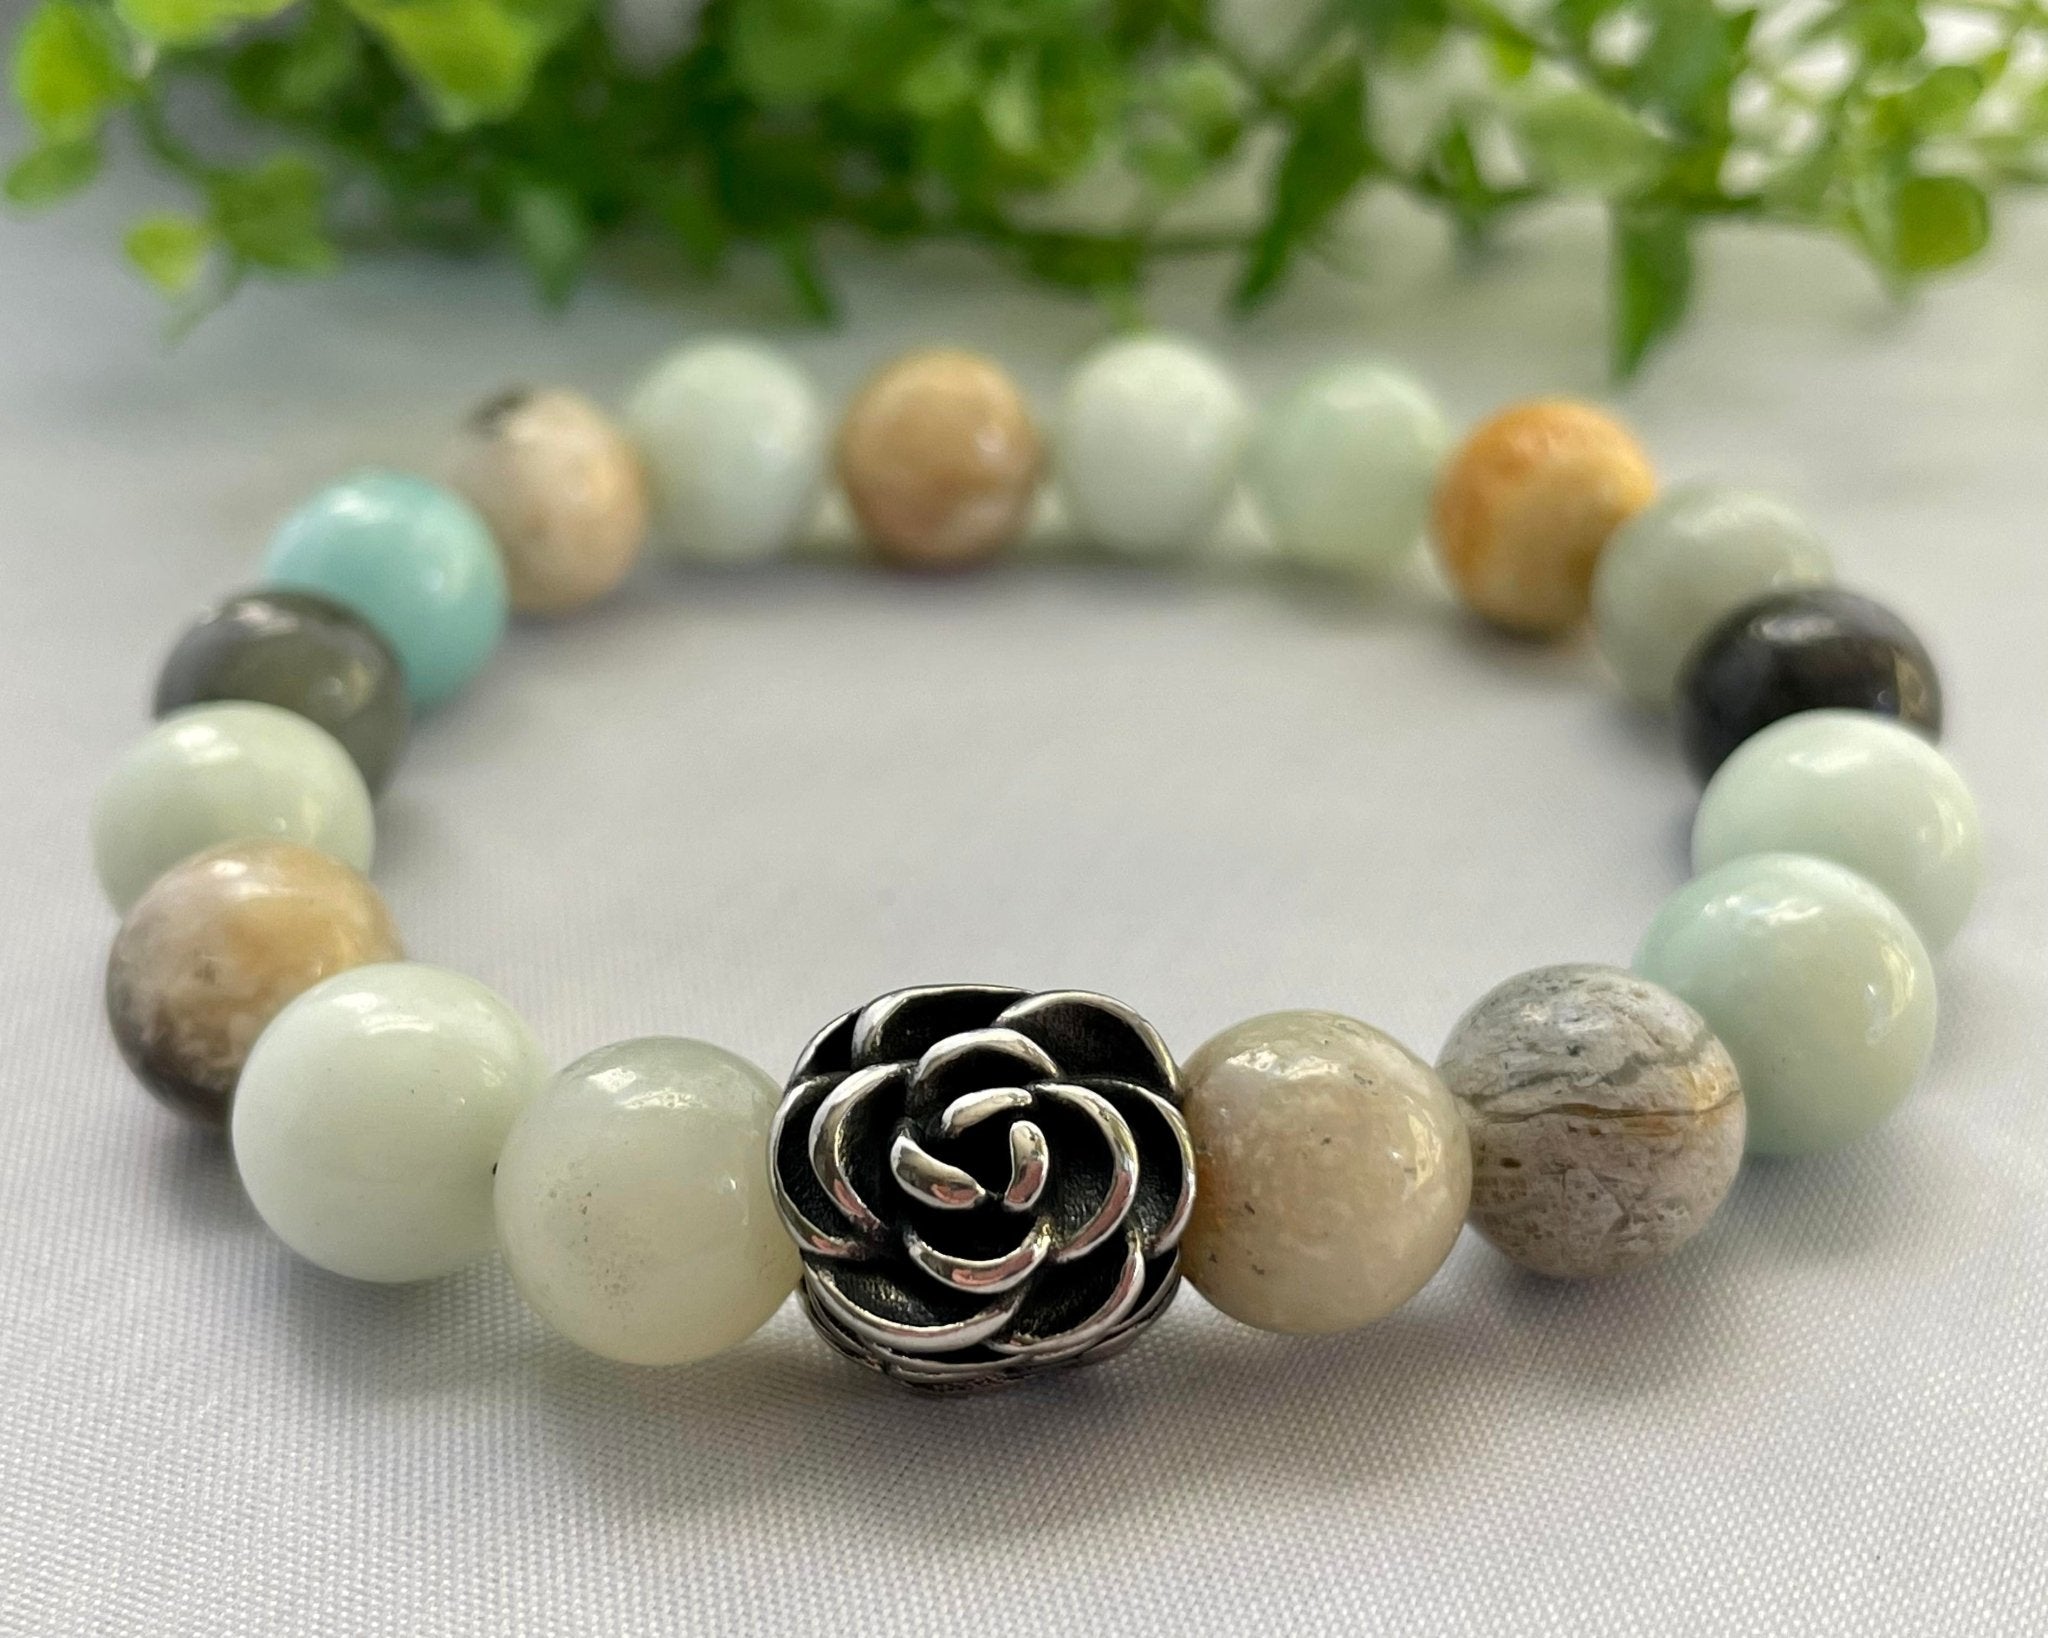 Natural Amazonite Stone 10 mm Stretchy Beaded Bracelet with Stainless Bead Flower - CYR'S CREATIONS